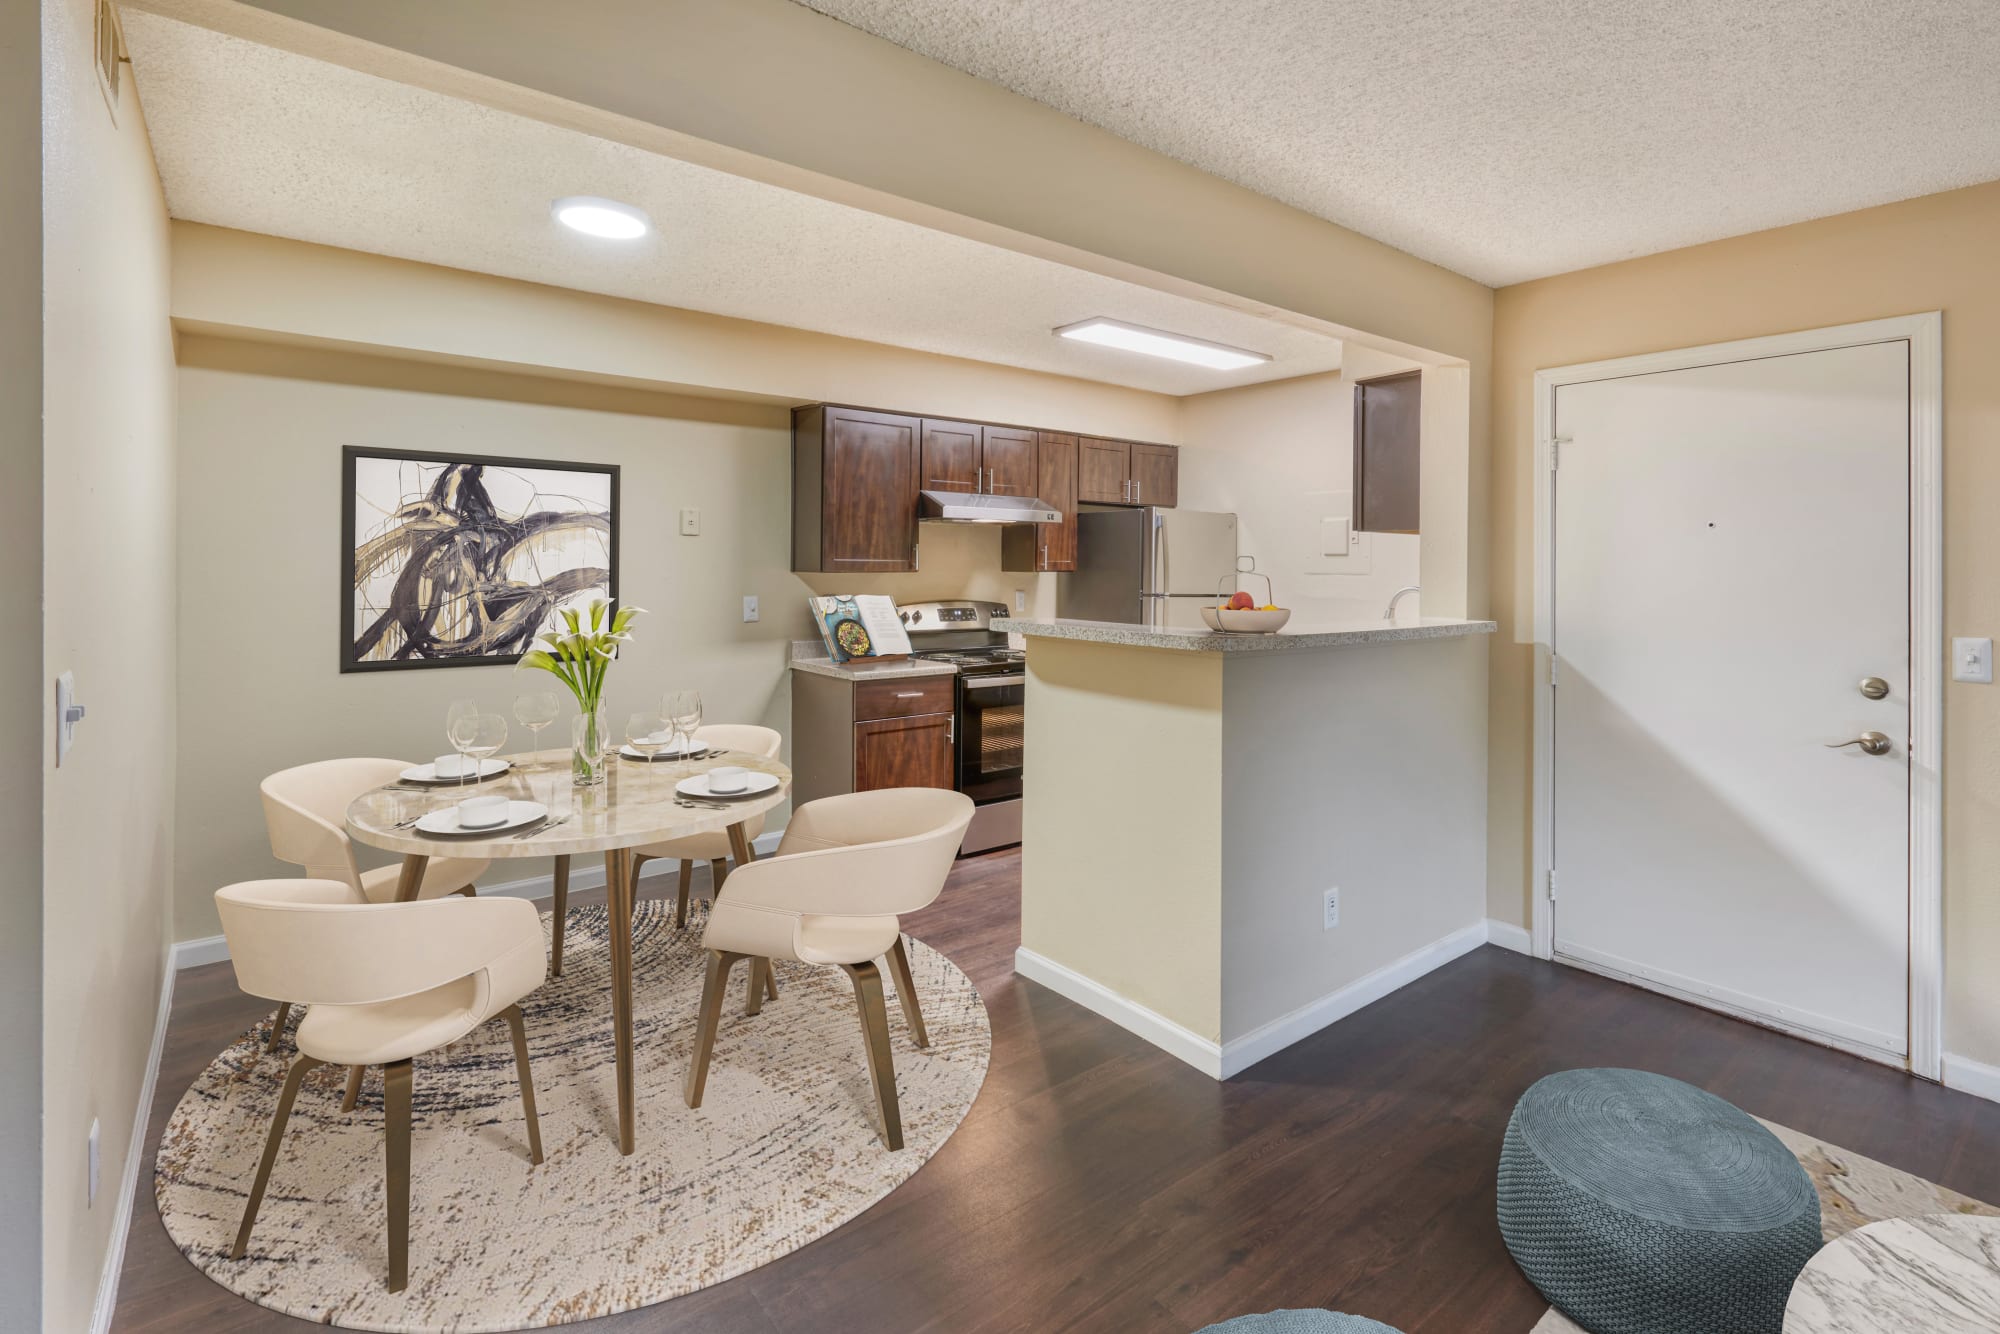 Kitchen and dining room with brown accents and espresso cabinets at Alton Green Apartments in Denver, Colorado